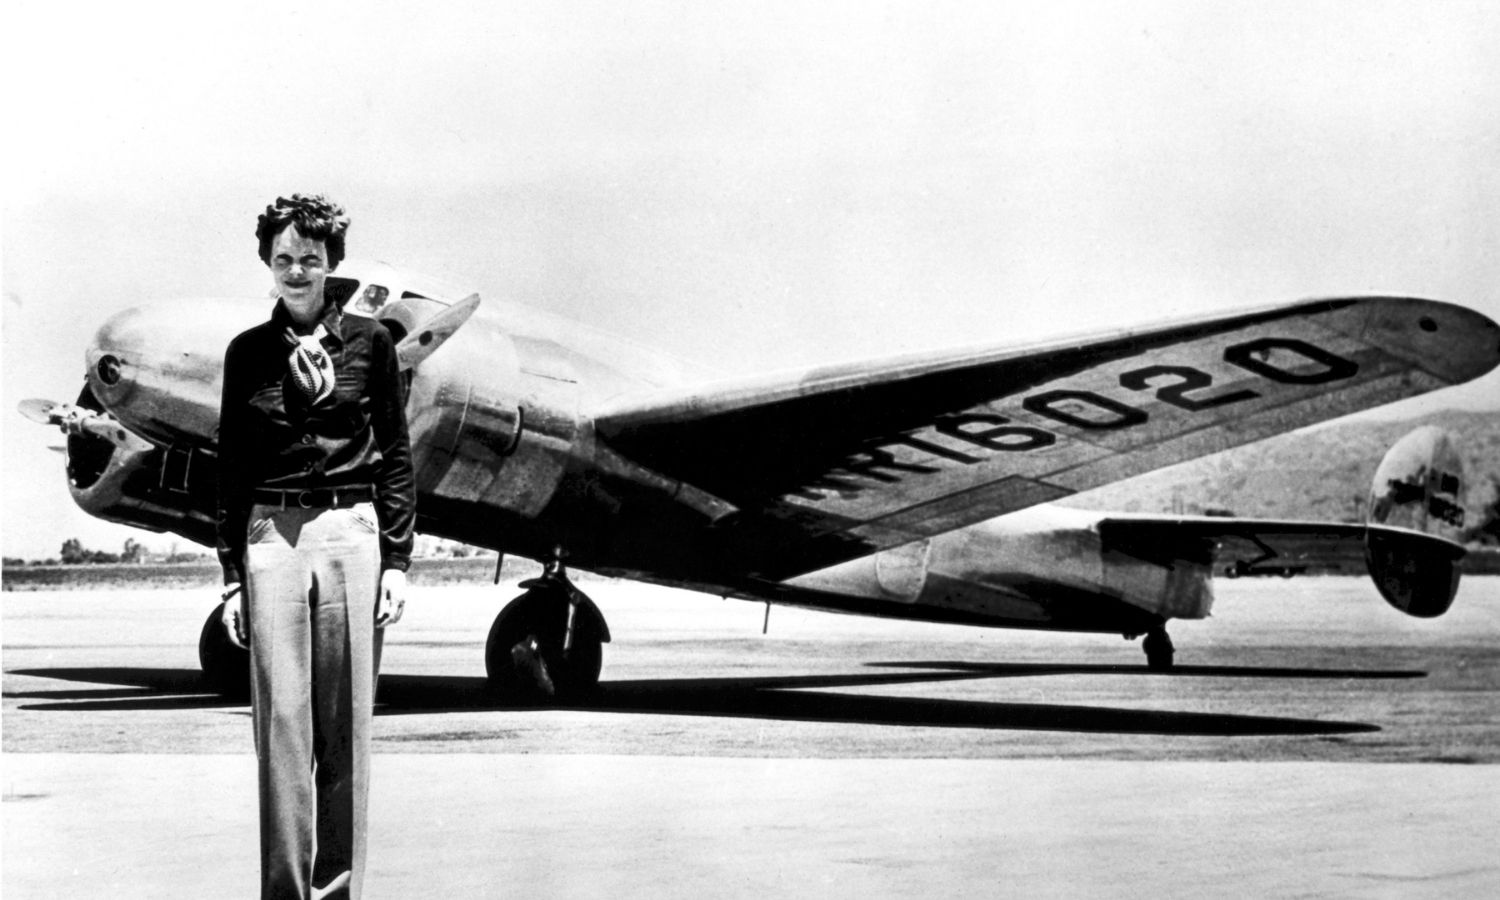 OTD in 1932: Amelia Earhart took off from Newfoundland.